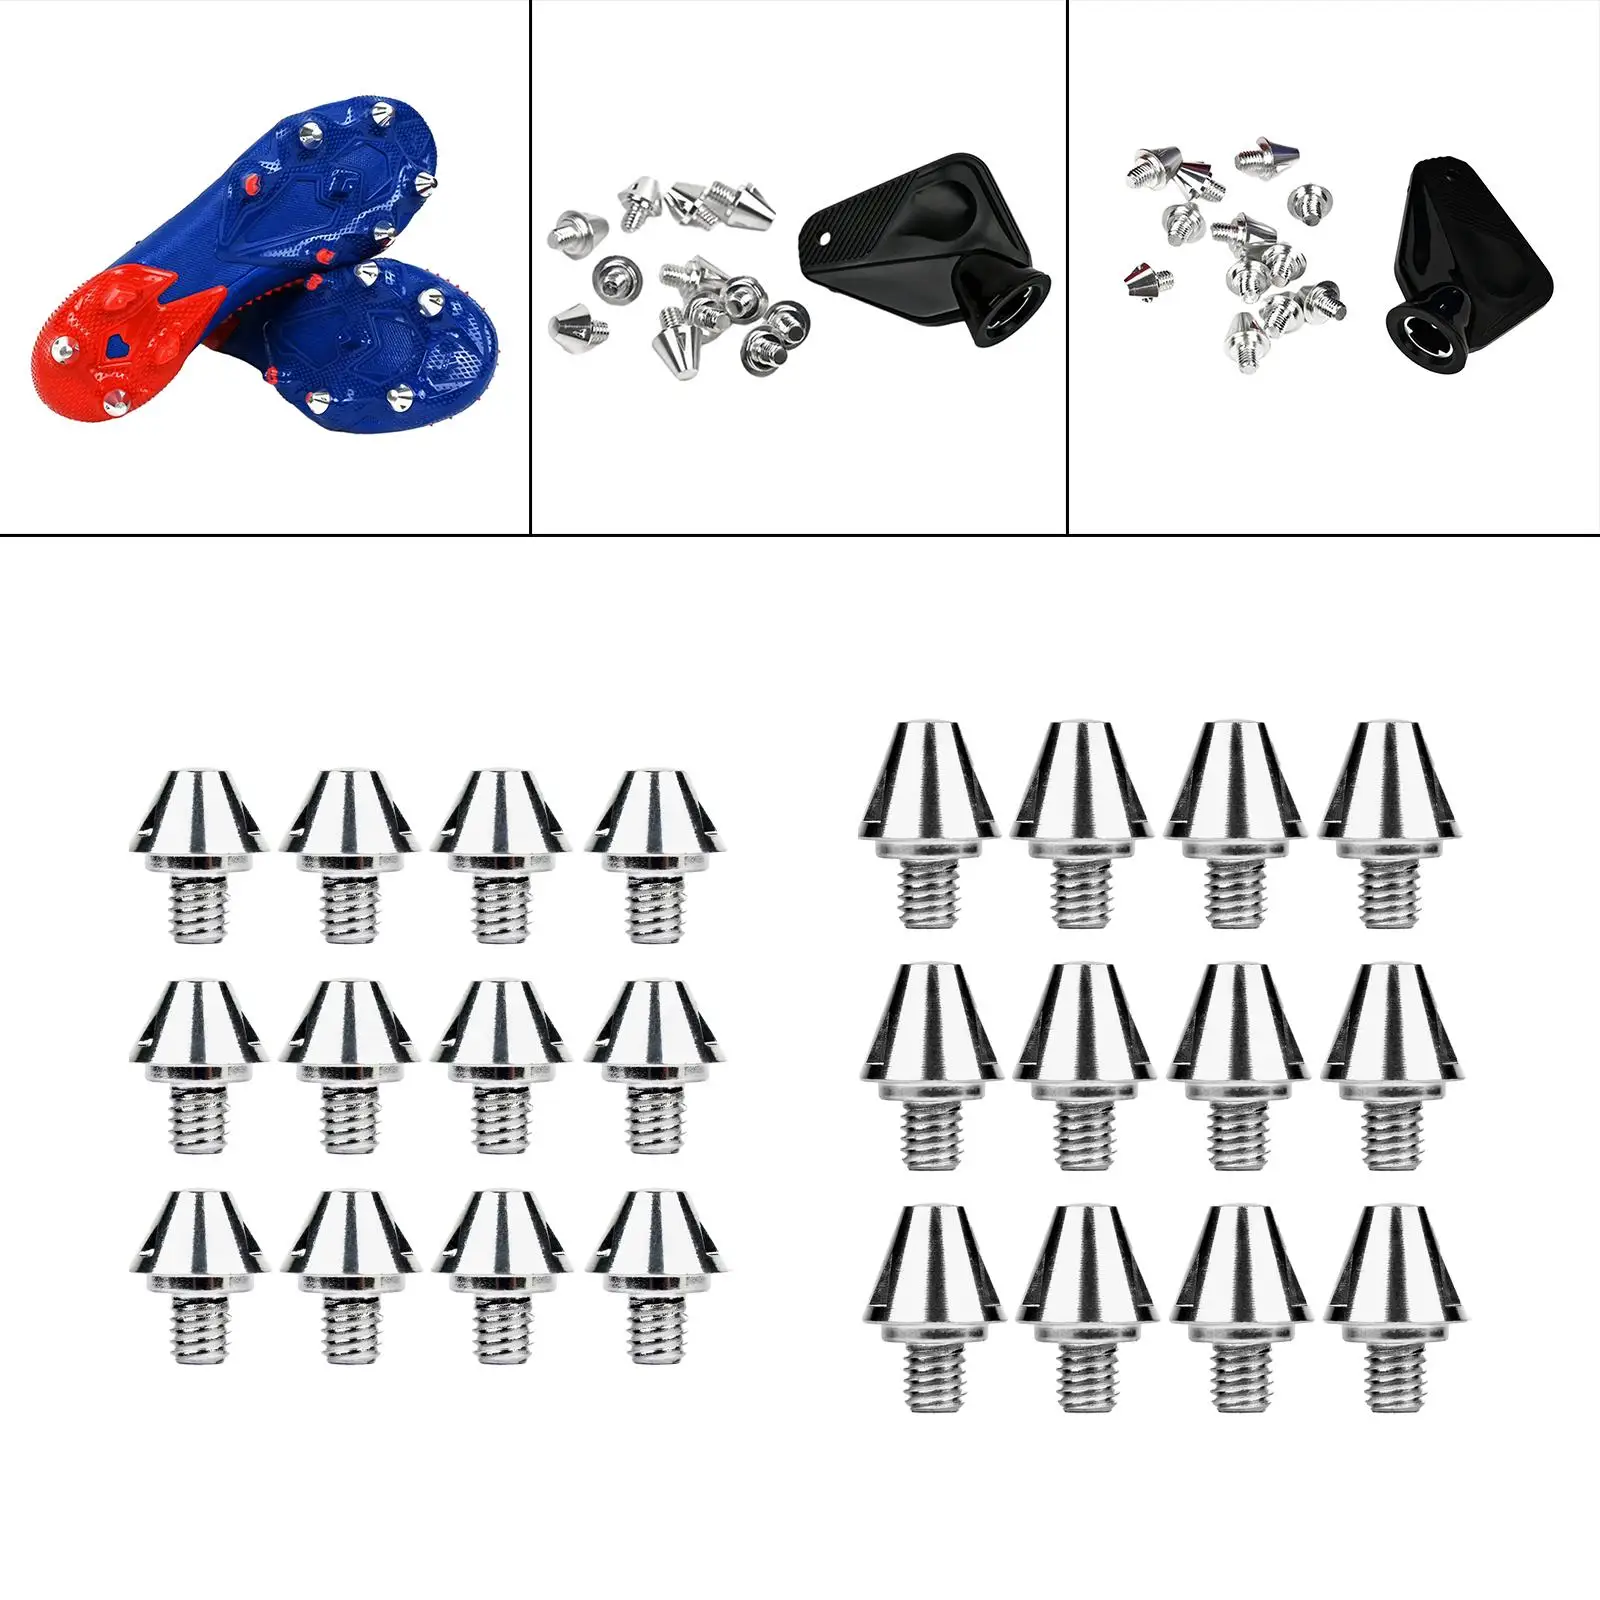 12x Football Boot Spikes Anti Slip Universal Soccer Boot Cleats for Competition Athletic Sneakers Indoor Outdoor Sports Training